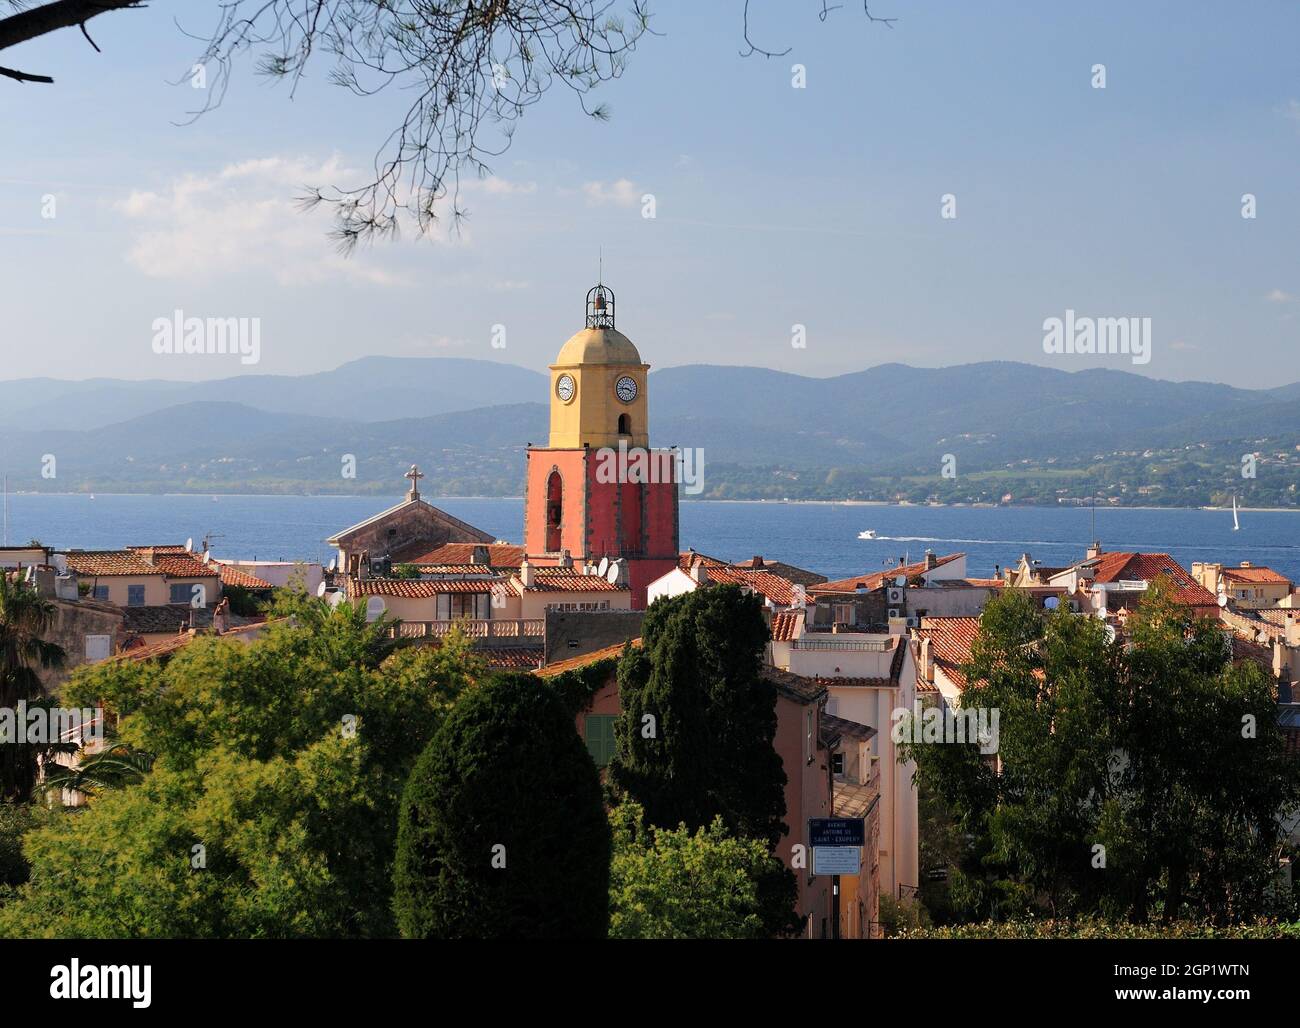 Clock Tower In The Old Town Of Saint Tropez With The Bay In The Background In Preovence France On A Beautiful Autumn Day With A Clear Blue Sky Stock Photo